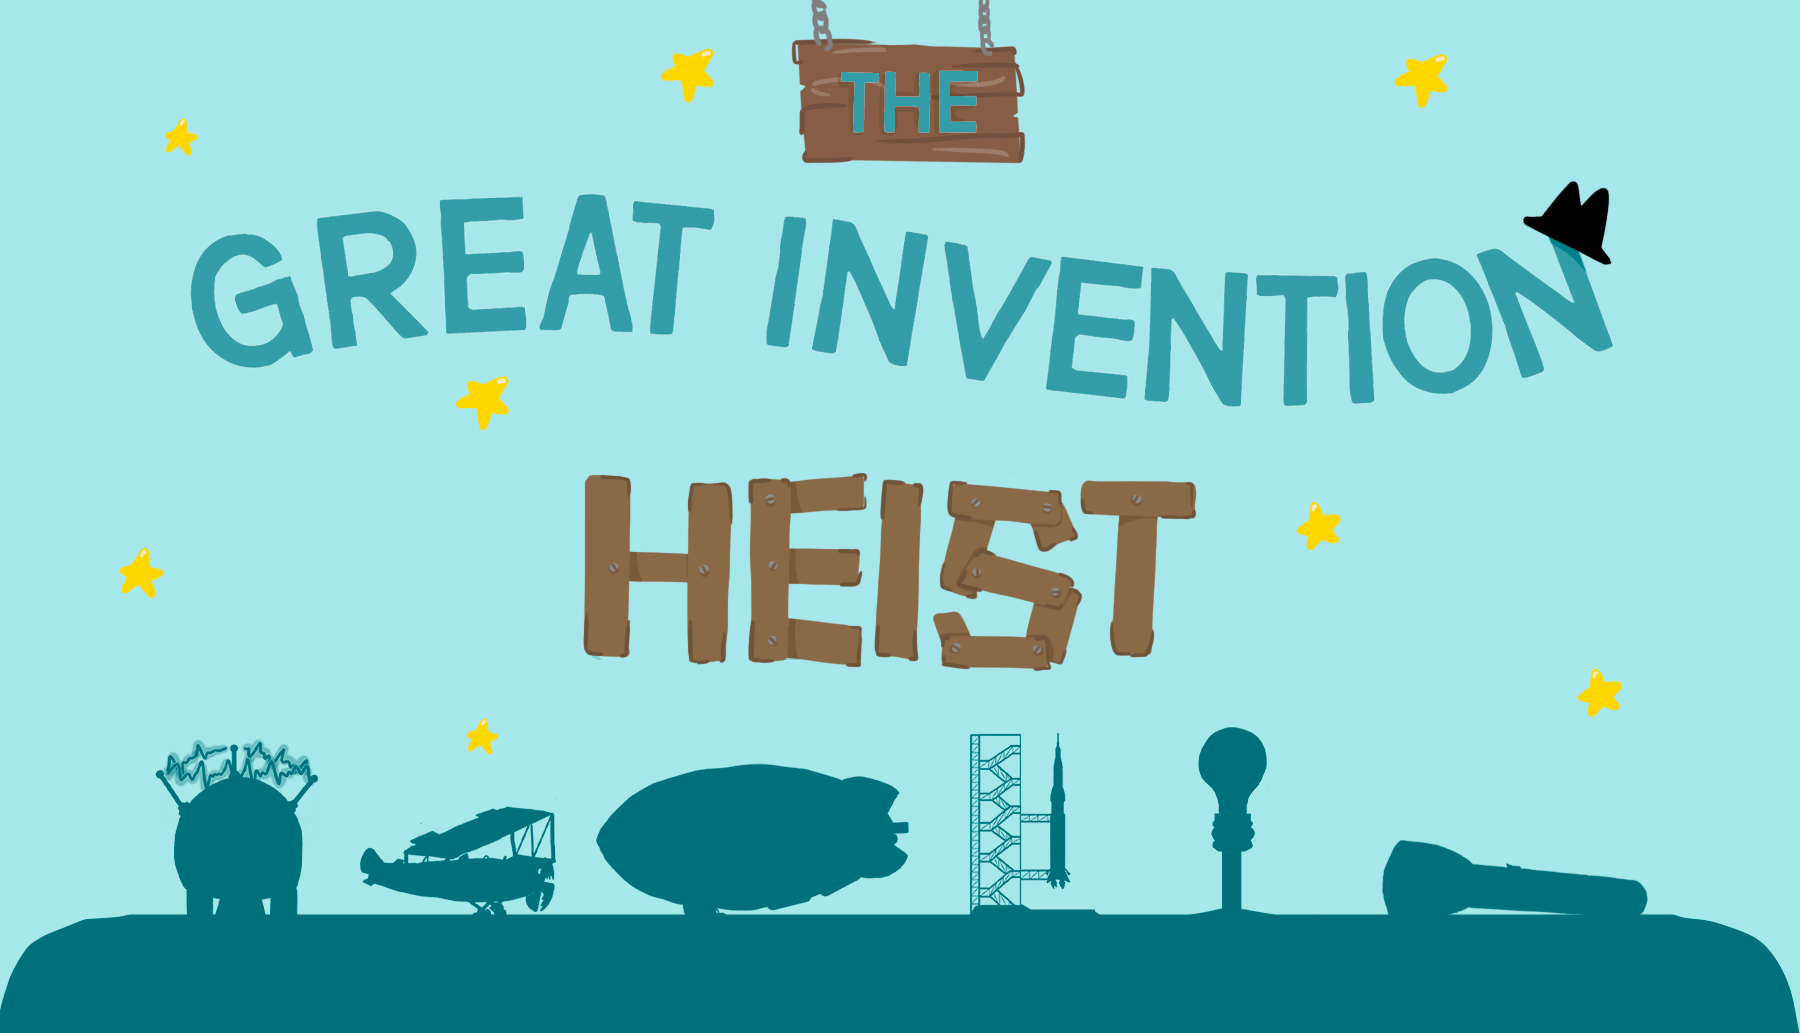 The Great Invention Heist